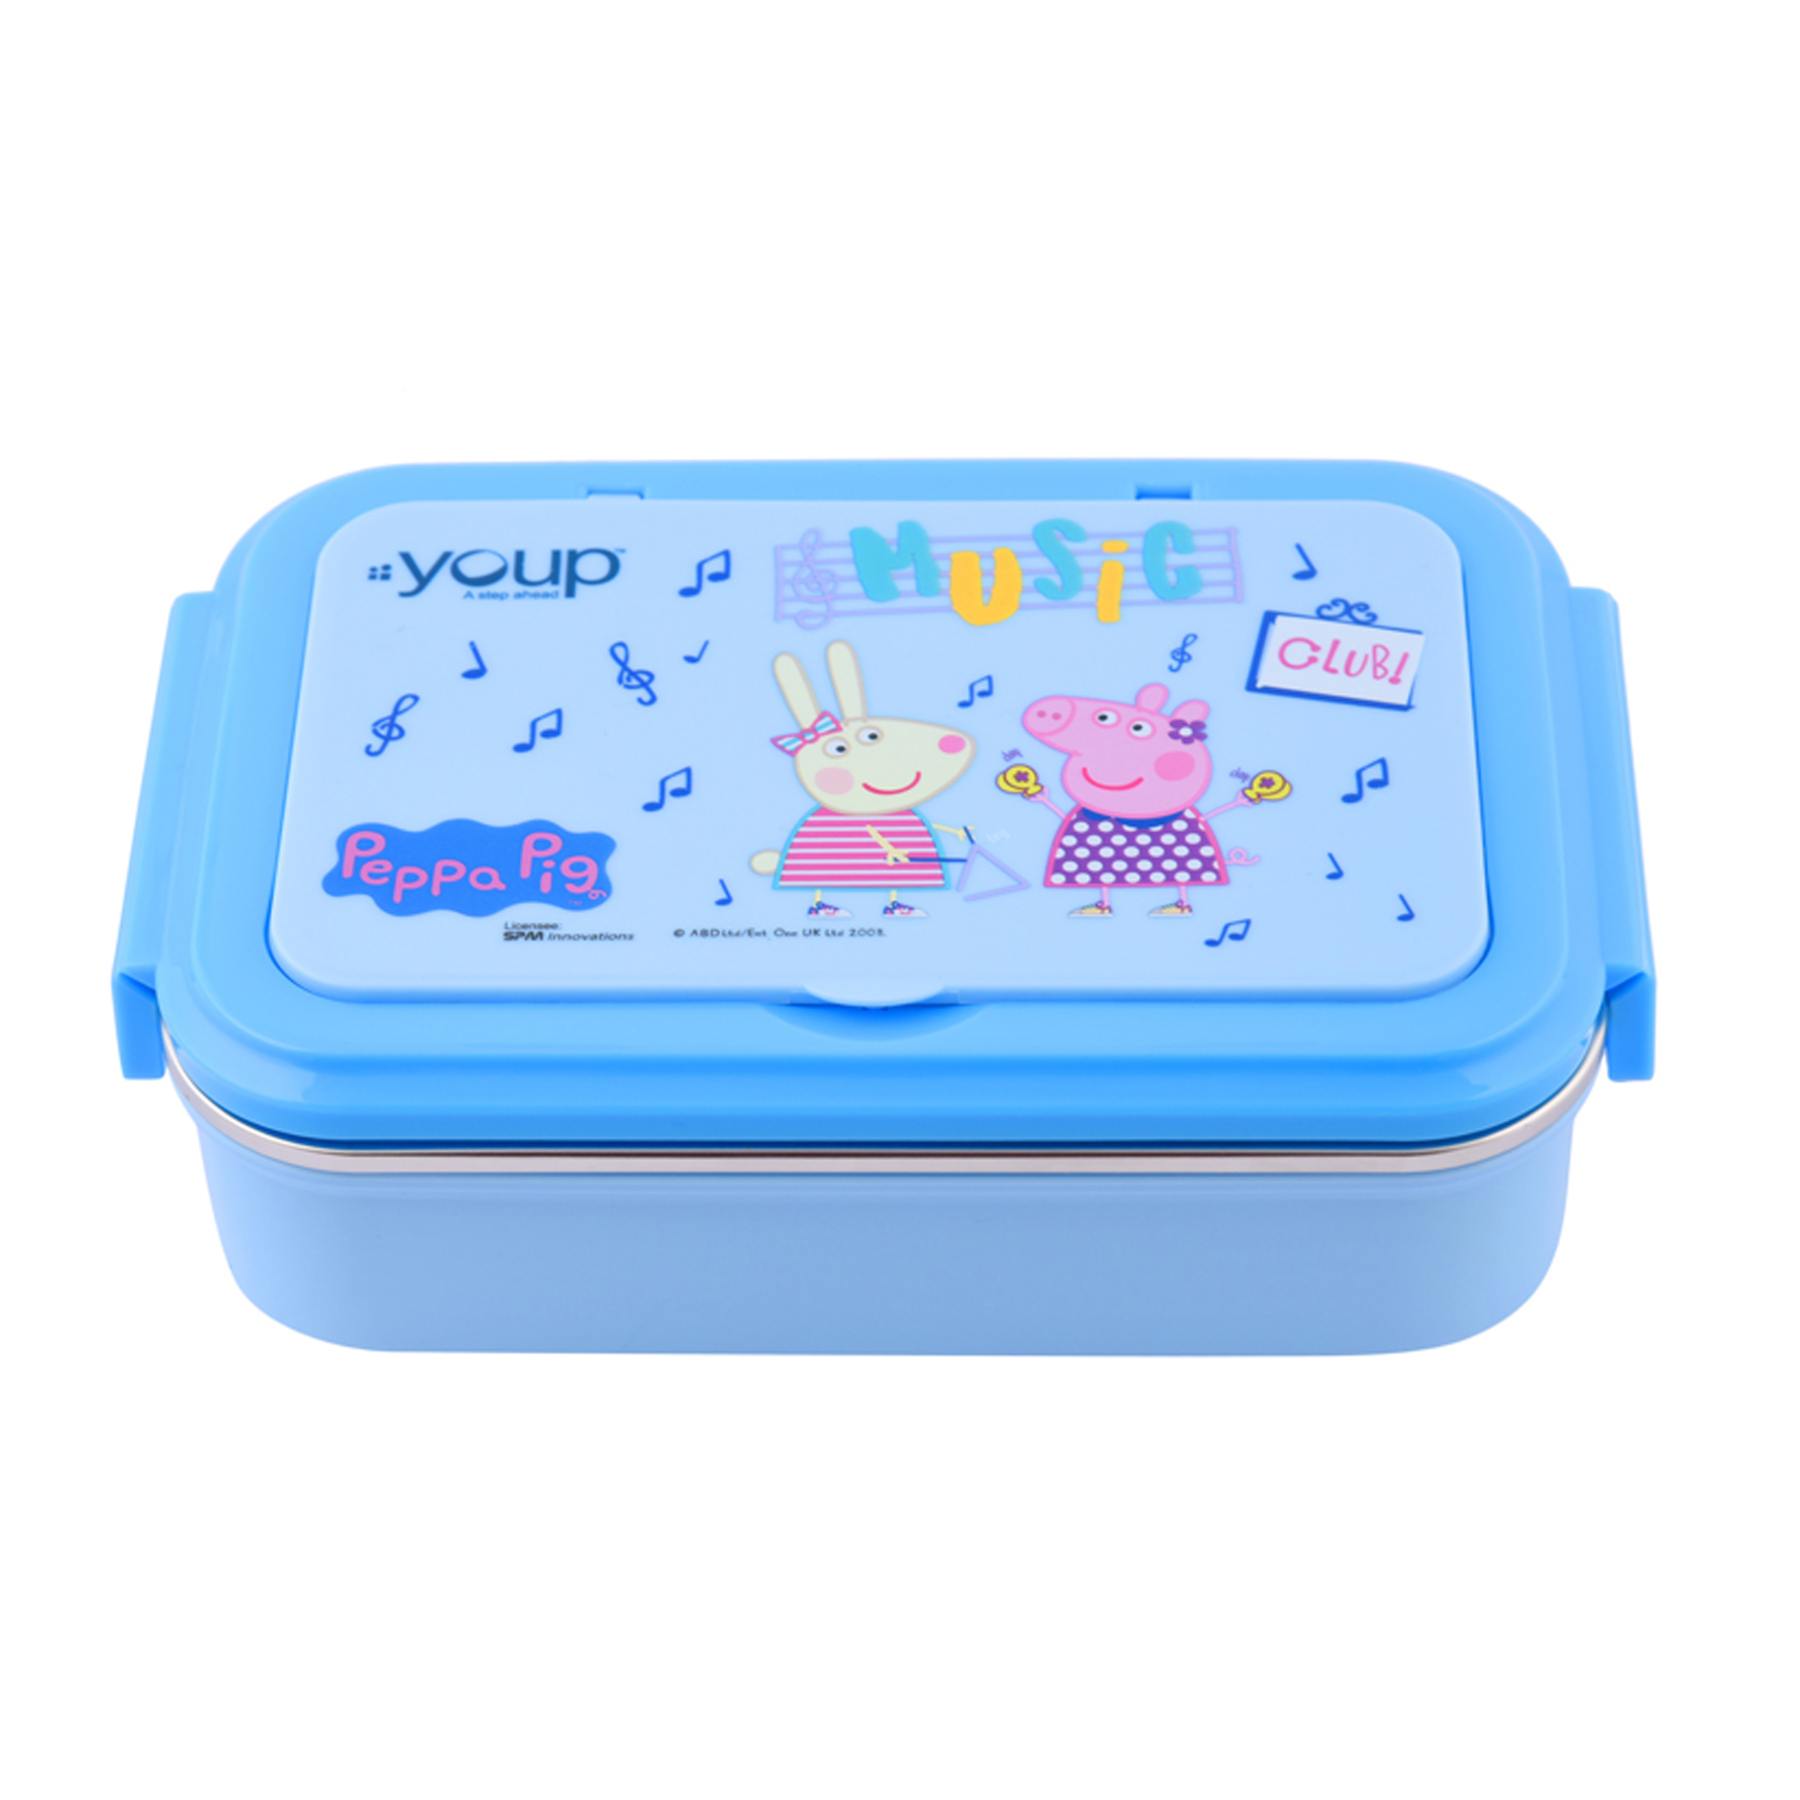 Youp Stainless Steel Blue Color Peppa Pig Kids Lunch Box Lunch Break - 850 Ml